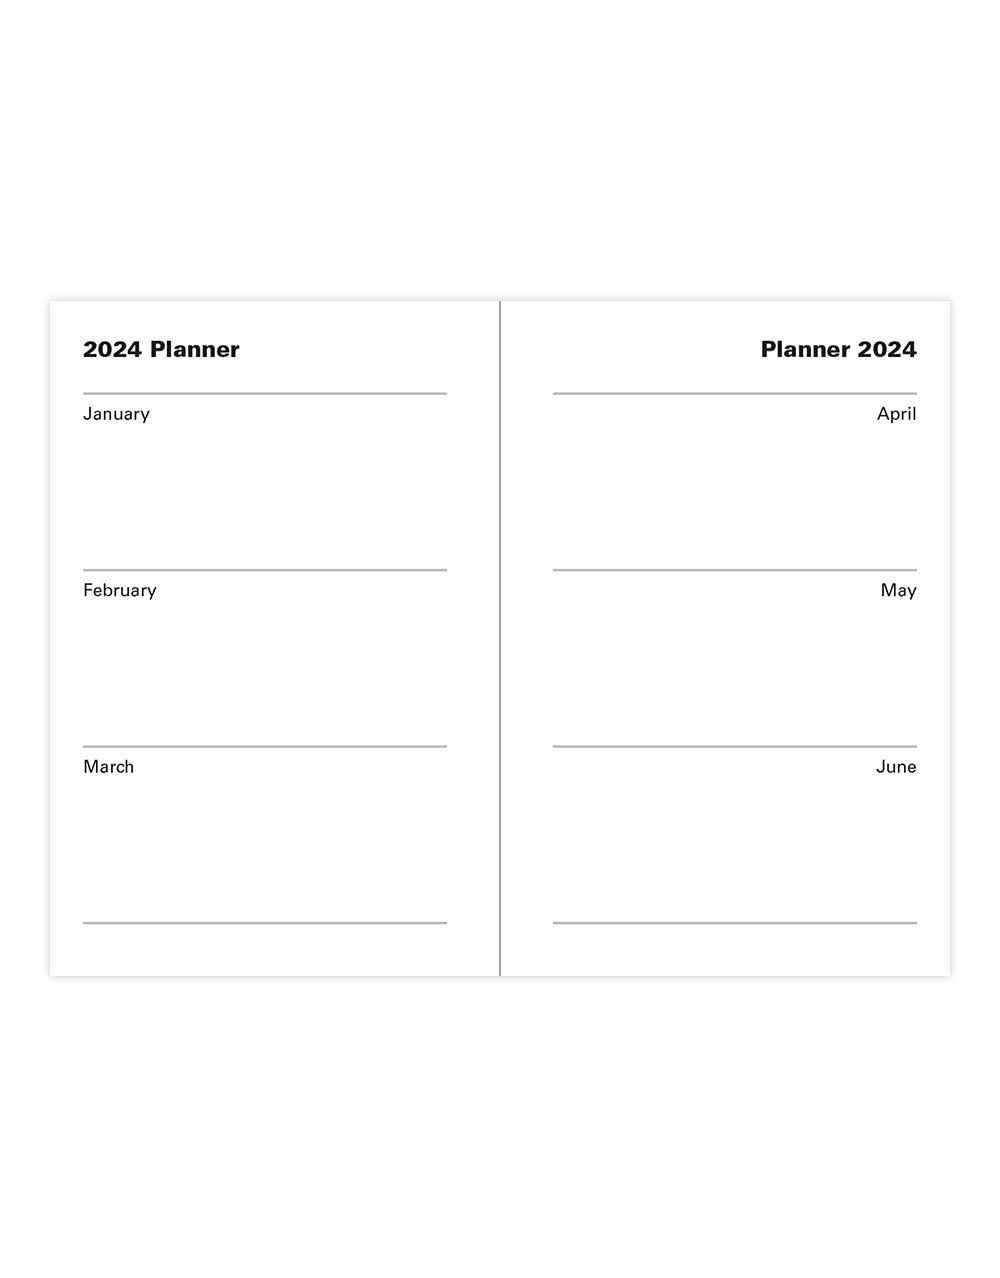 Letts of London 2024 Classic Mini Pocket Week to View Planner - Dark Blue